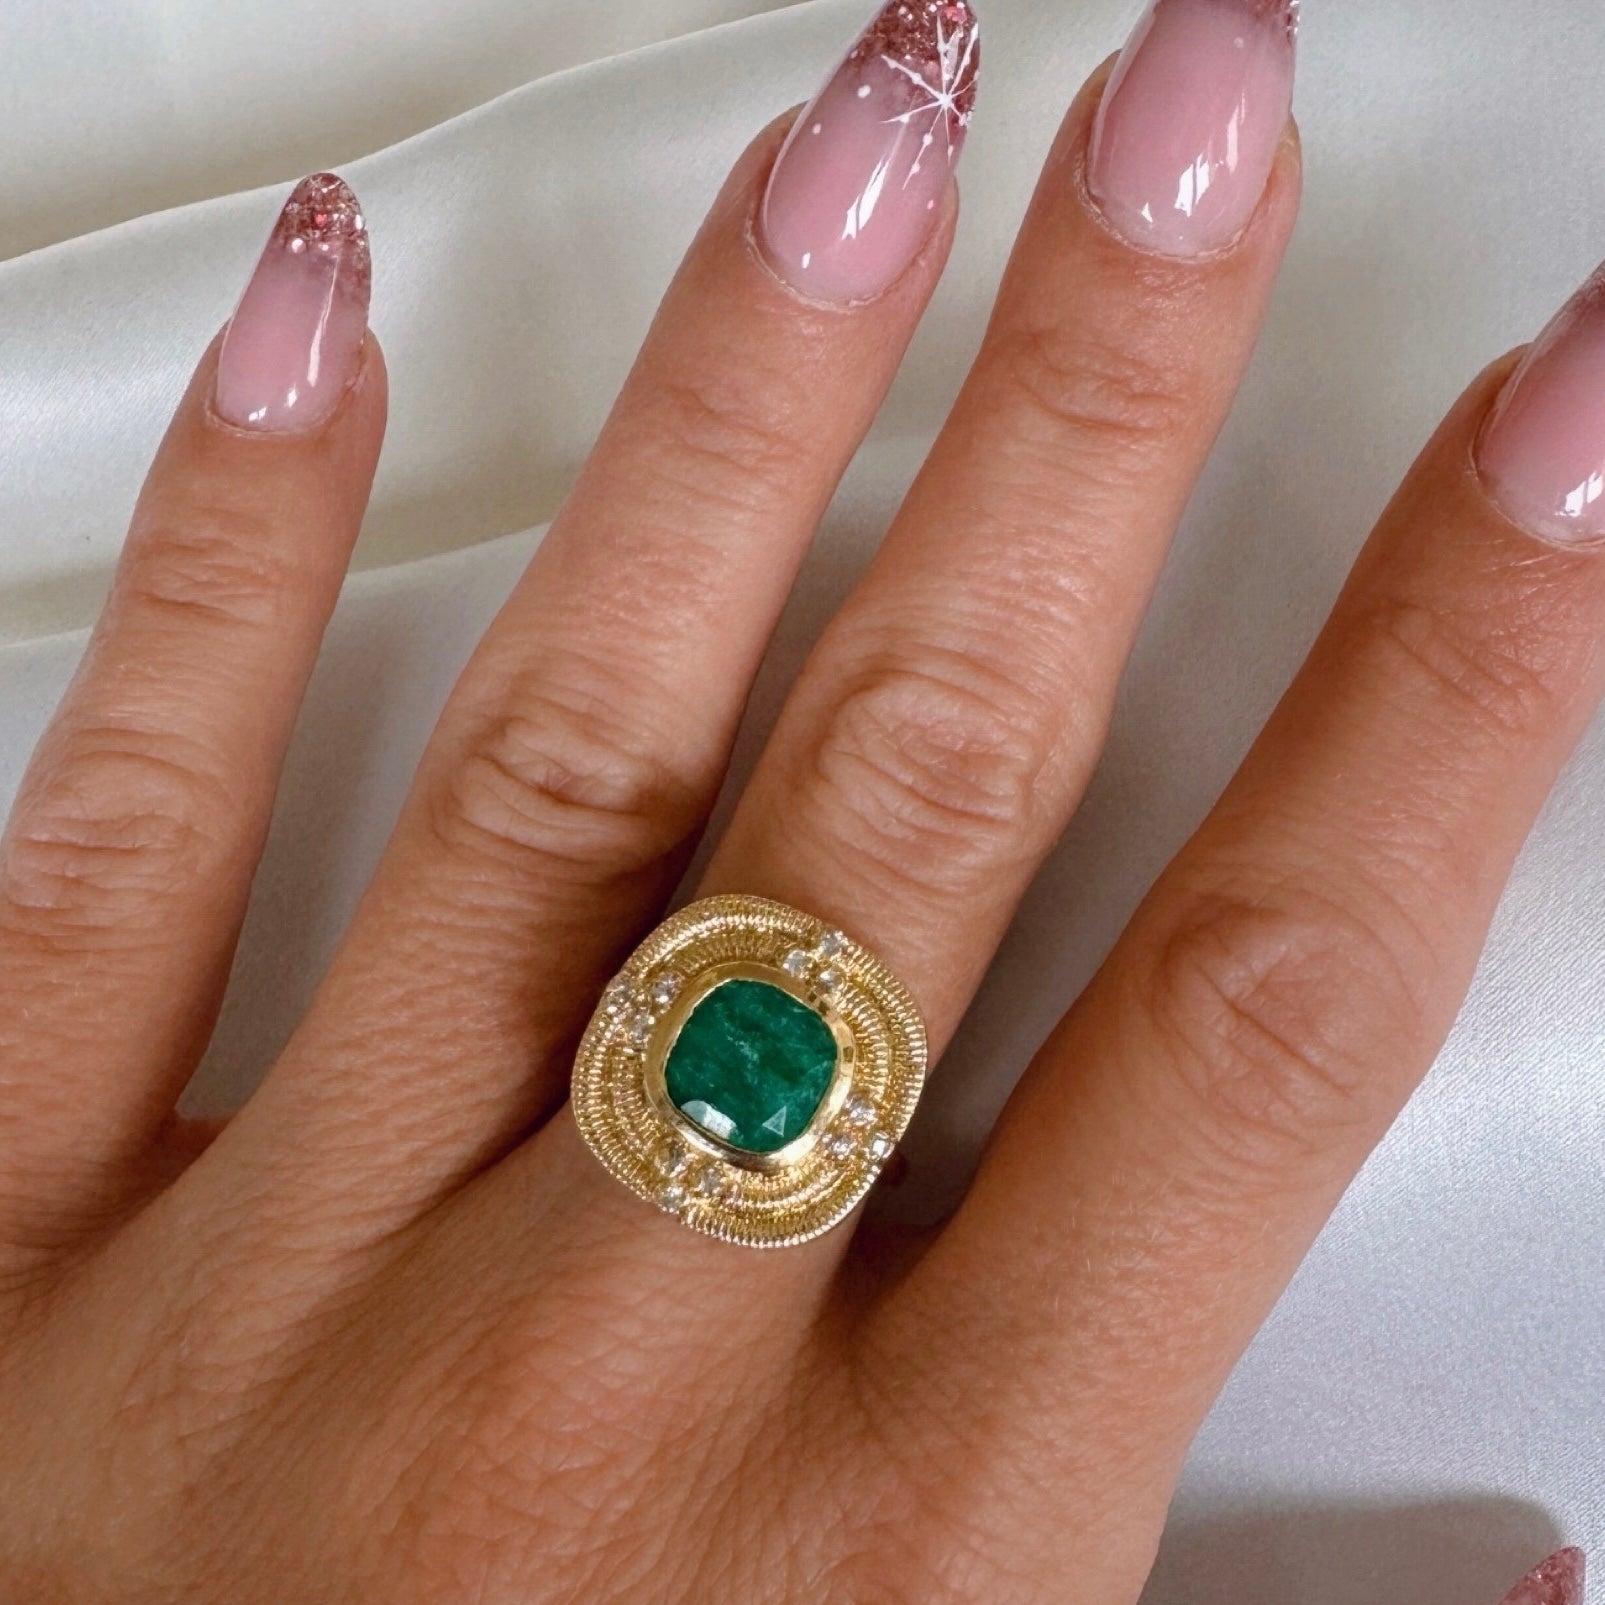 Gold-plated “Raw Emerald” ring